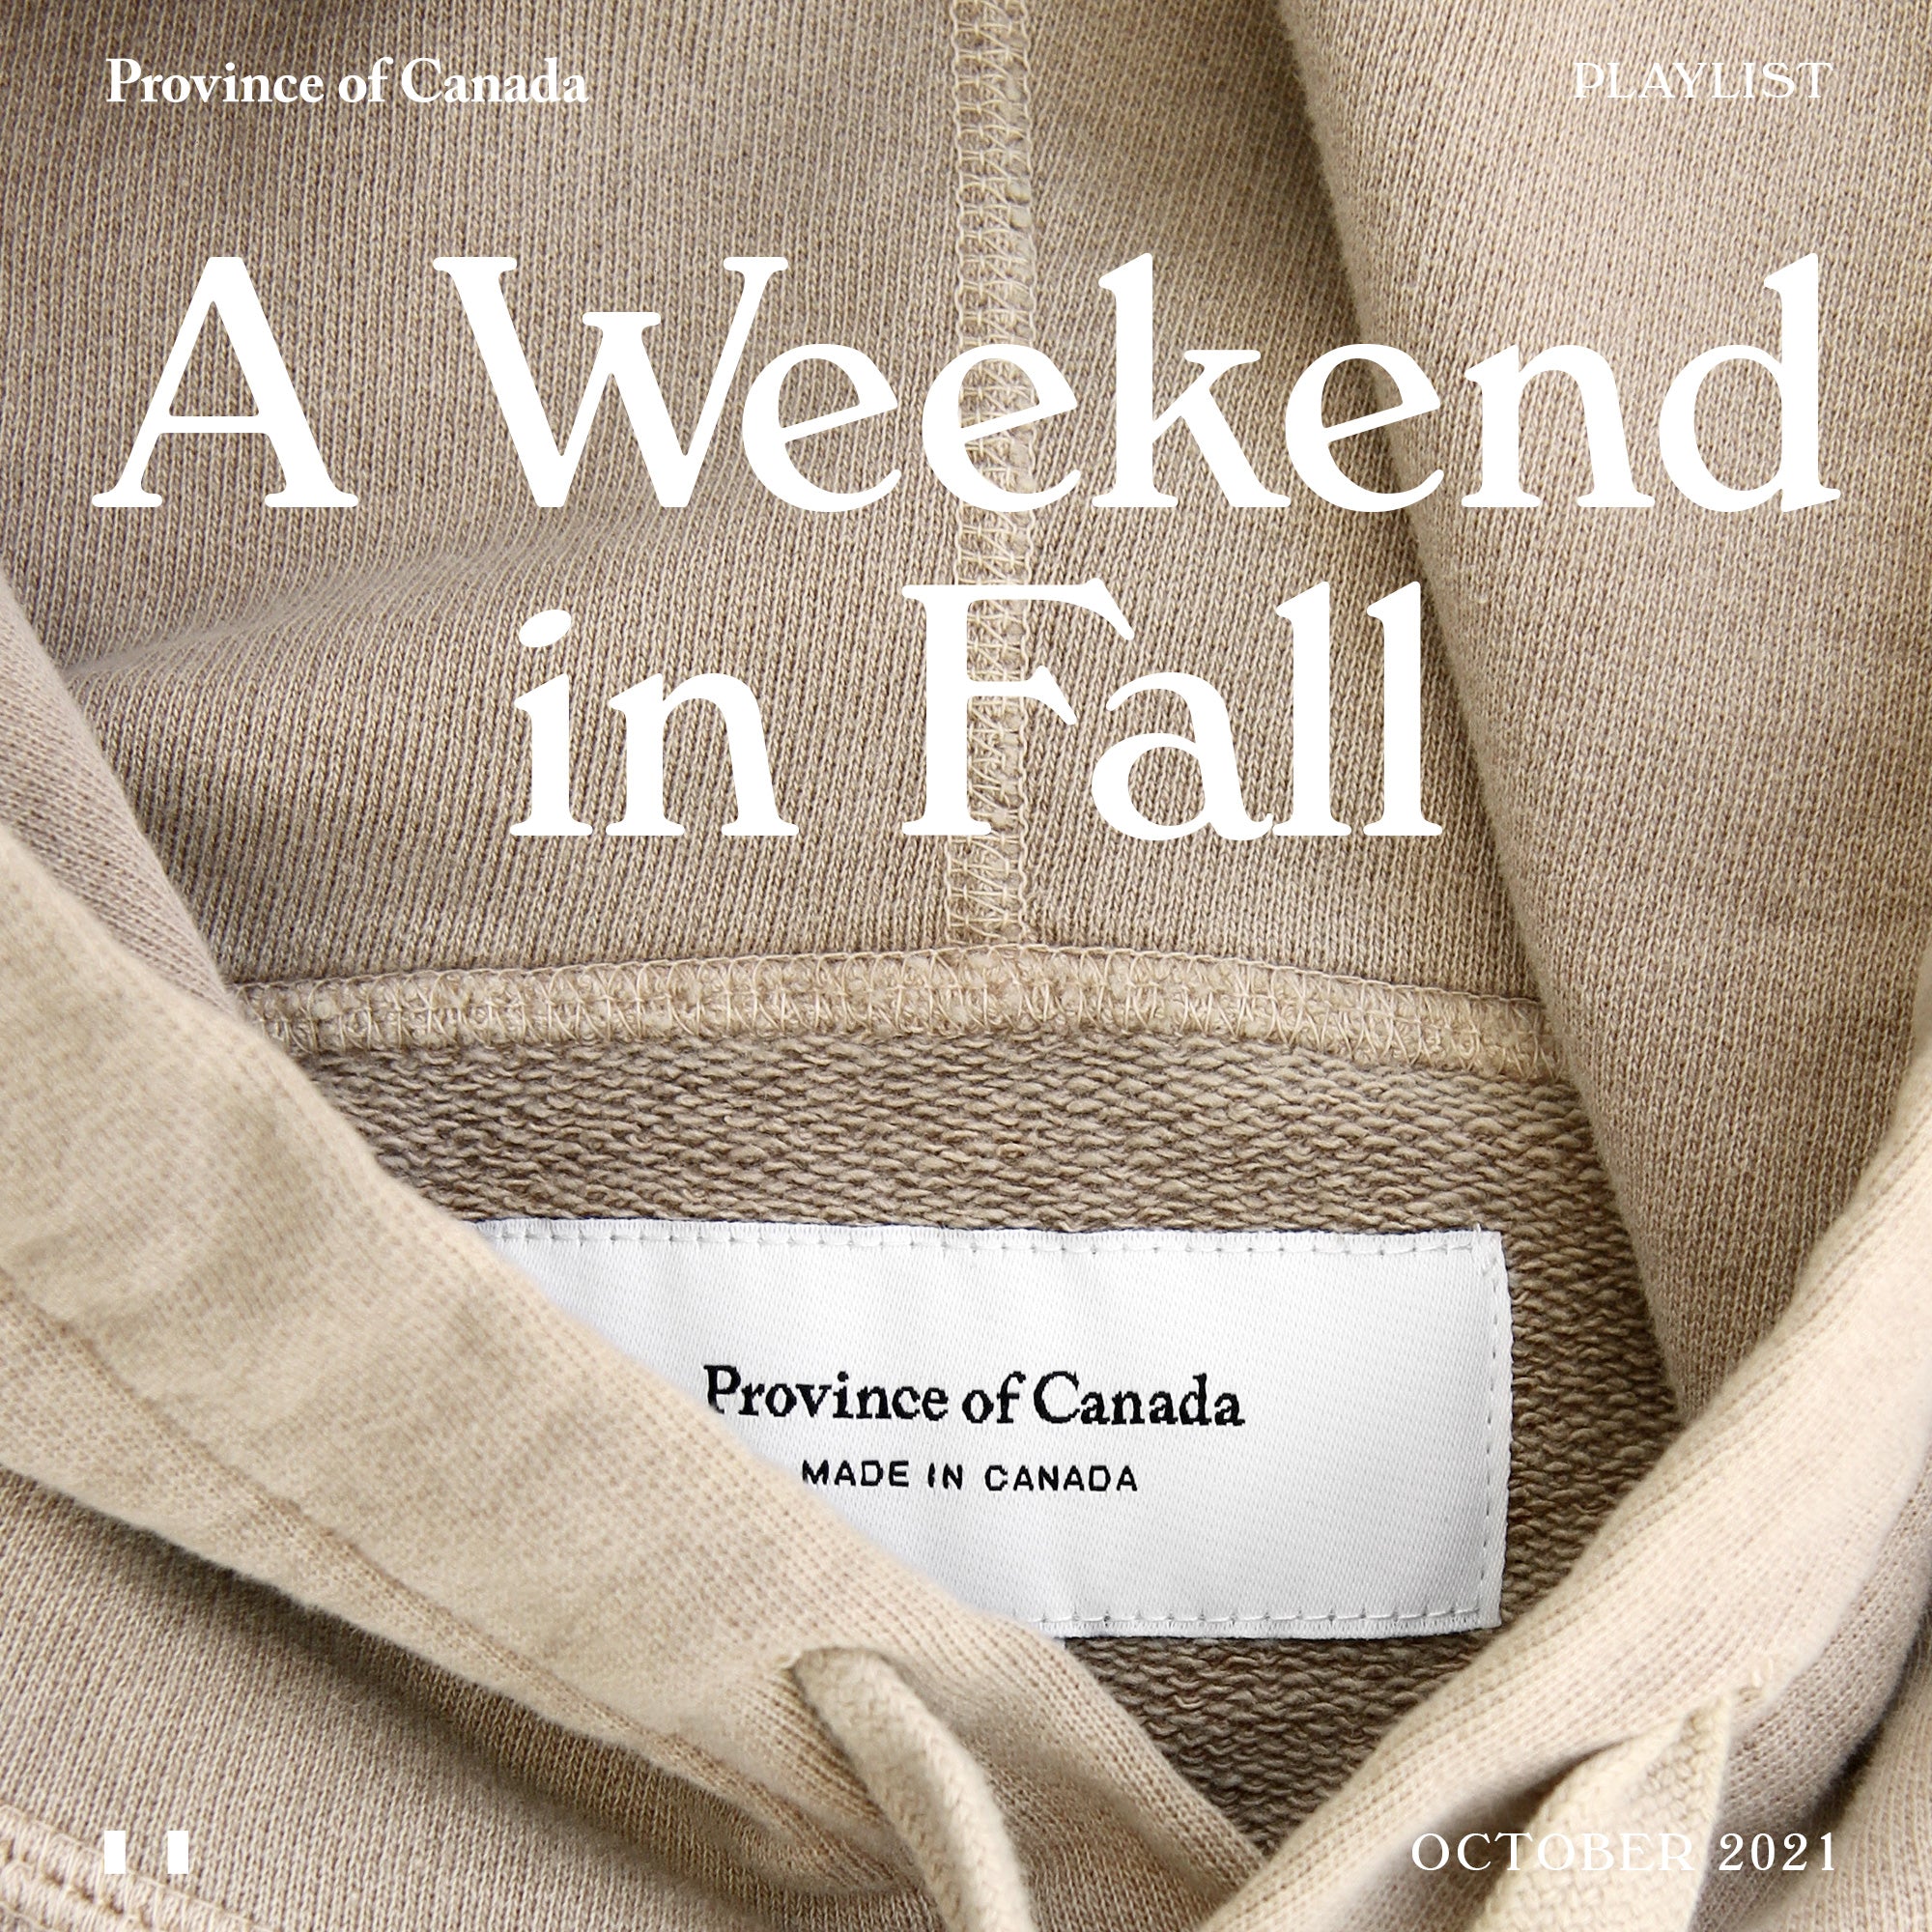 Province of Canada - Playlist: A Weekend in Fall